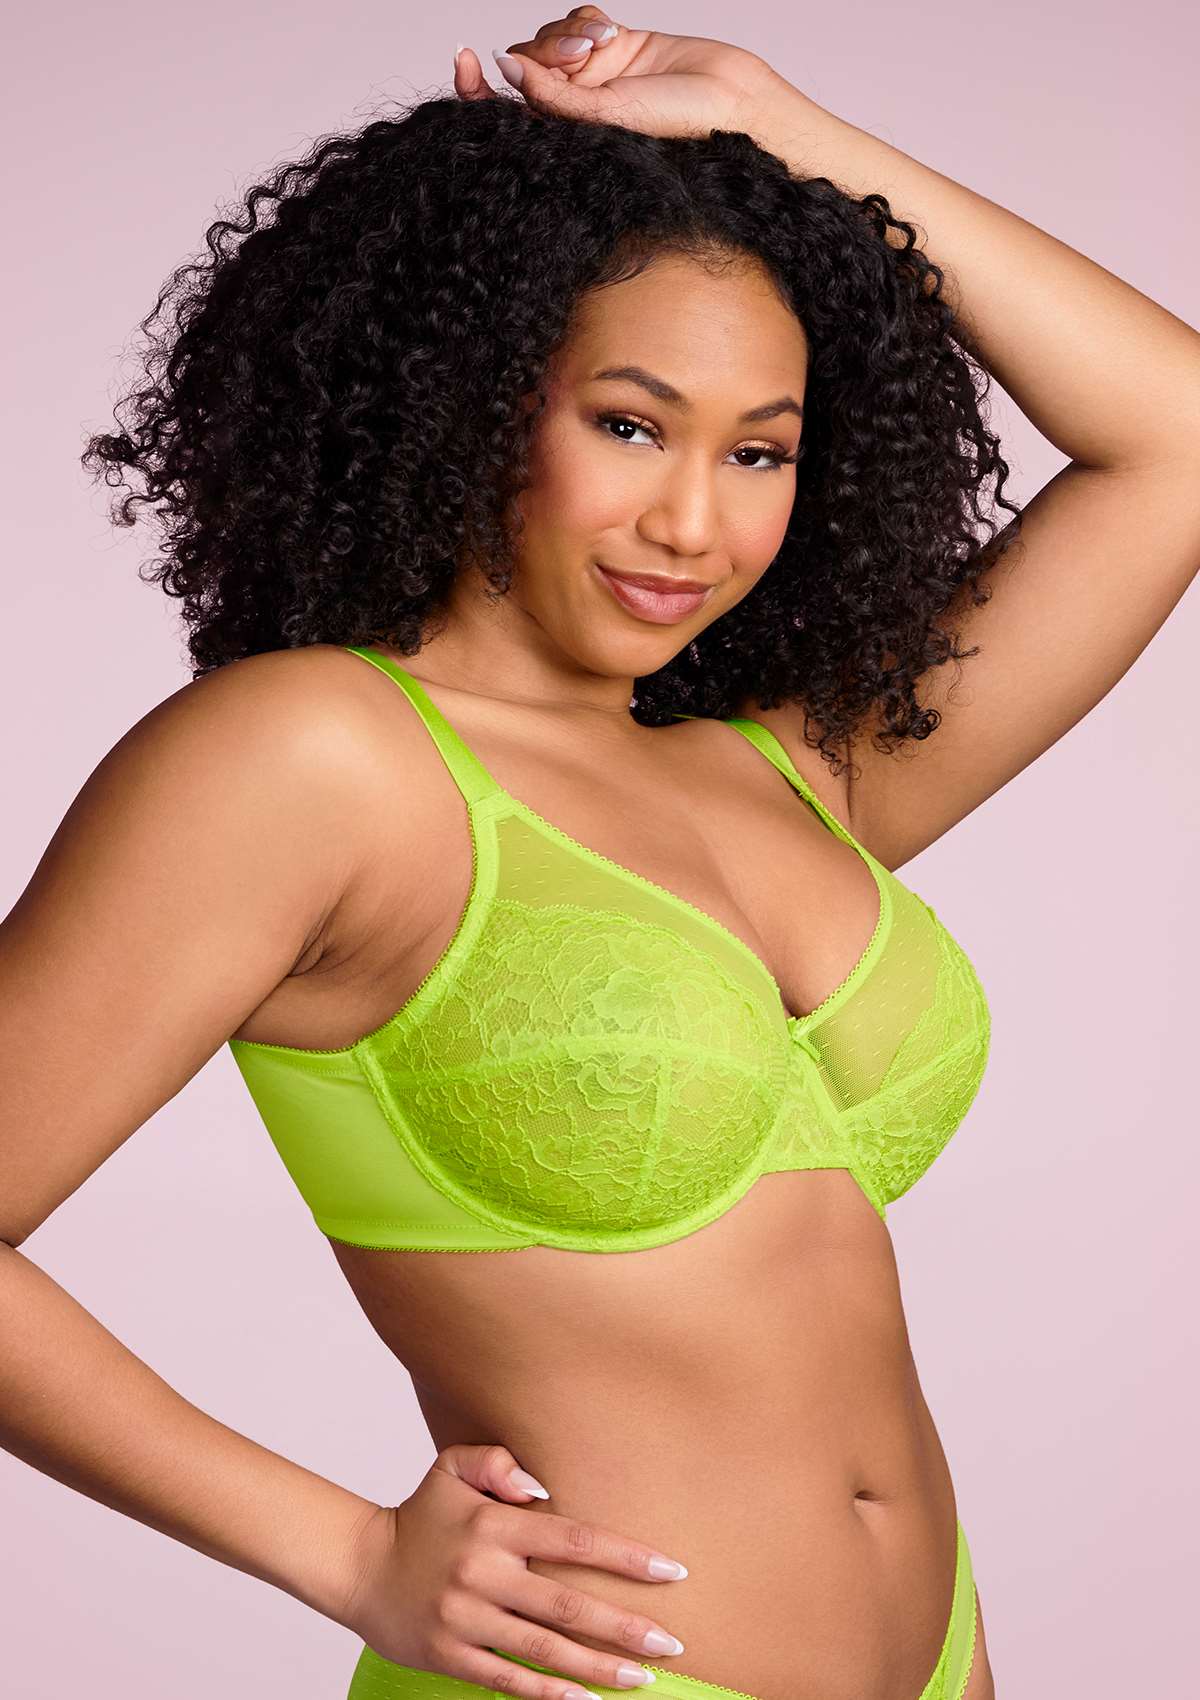 HSIA Enchante Full Cup Minimizing Bra: Supportive Unlined Lace Bra - Lime Green / 36 / G